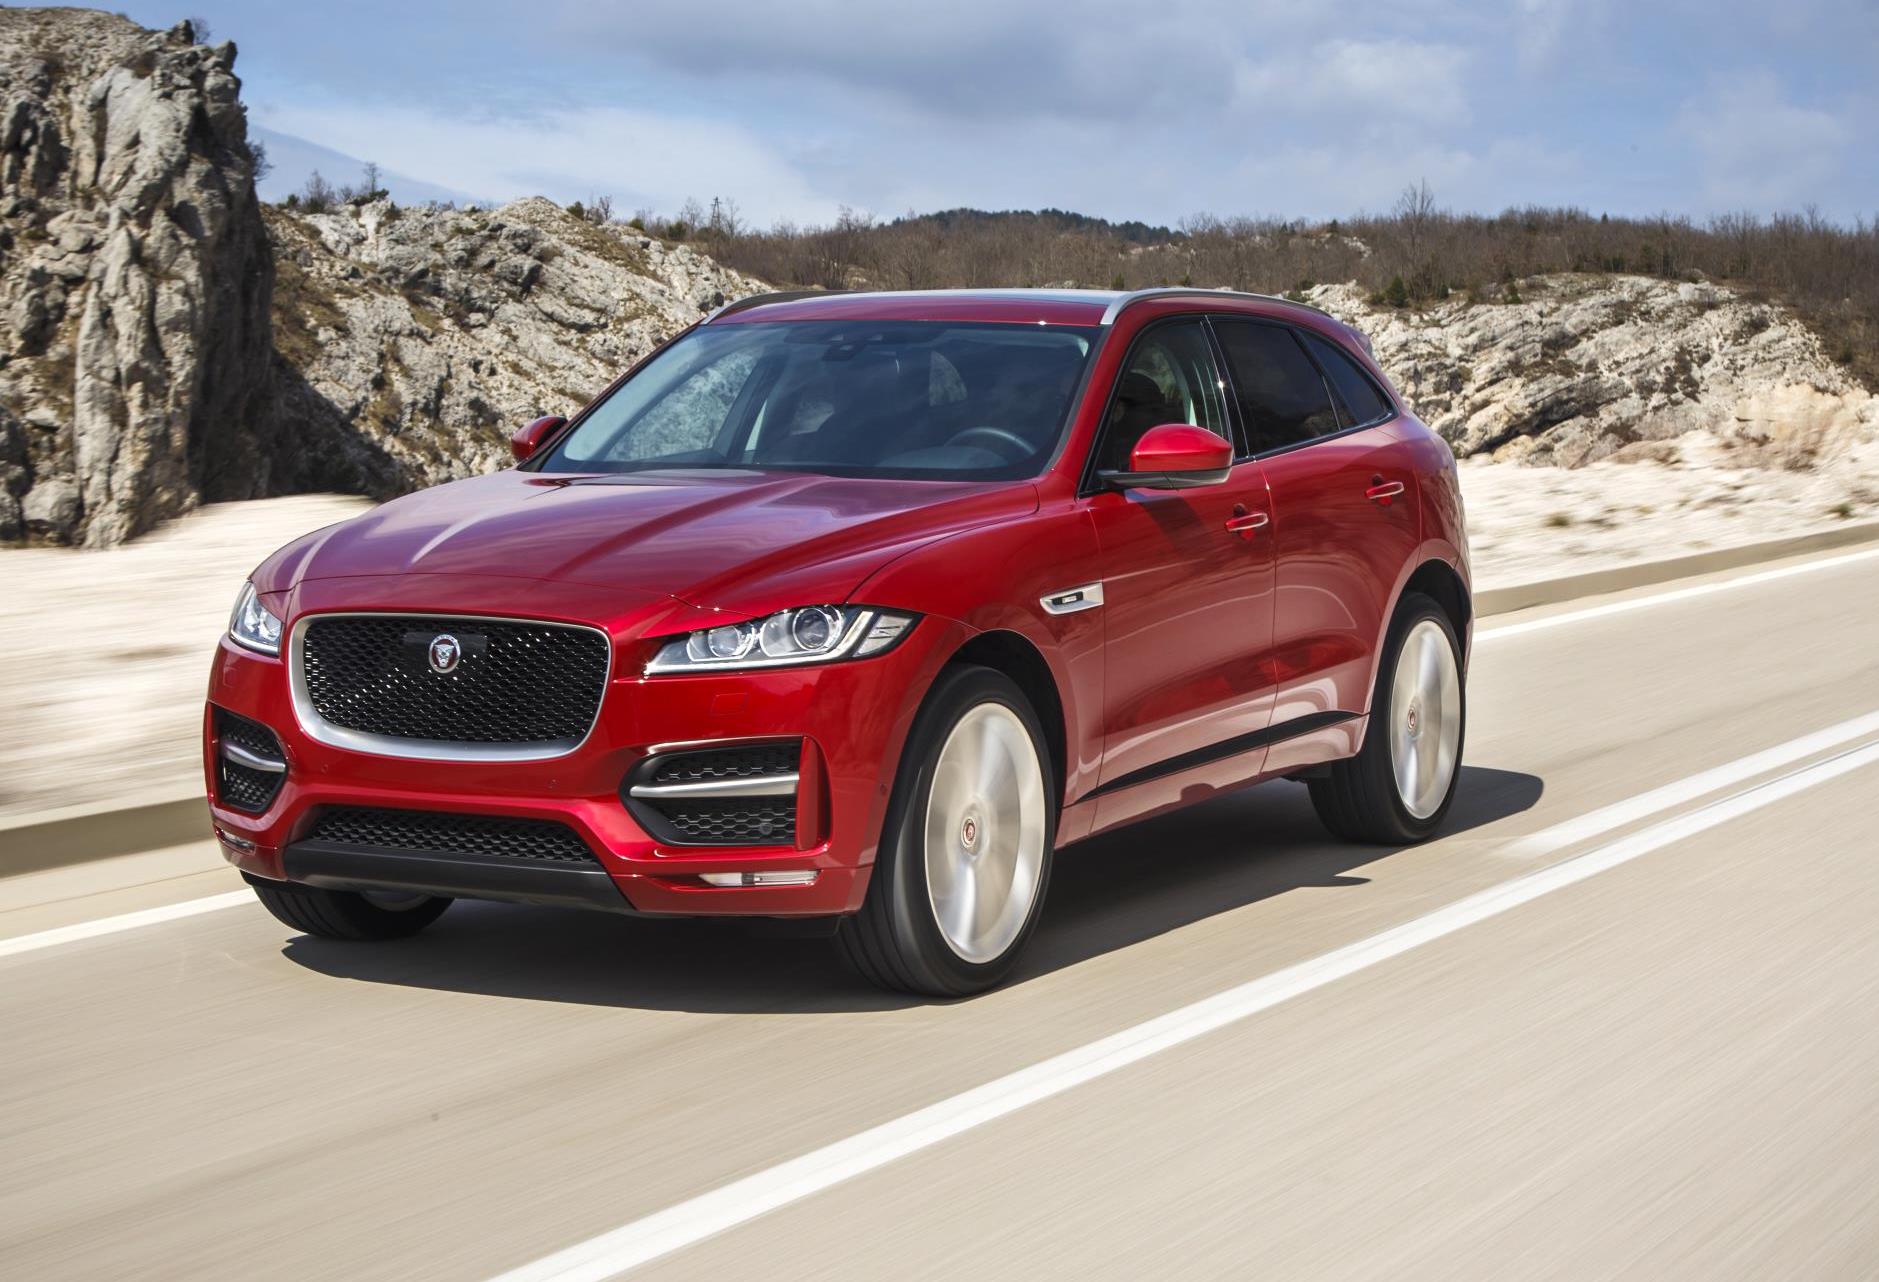 MY2019 Jaguar F-PACE announced, boosted safety & tech